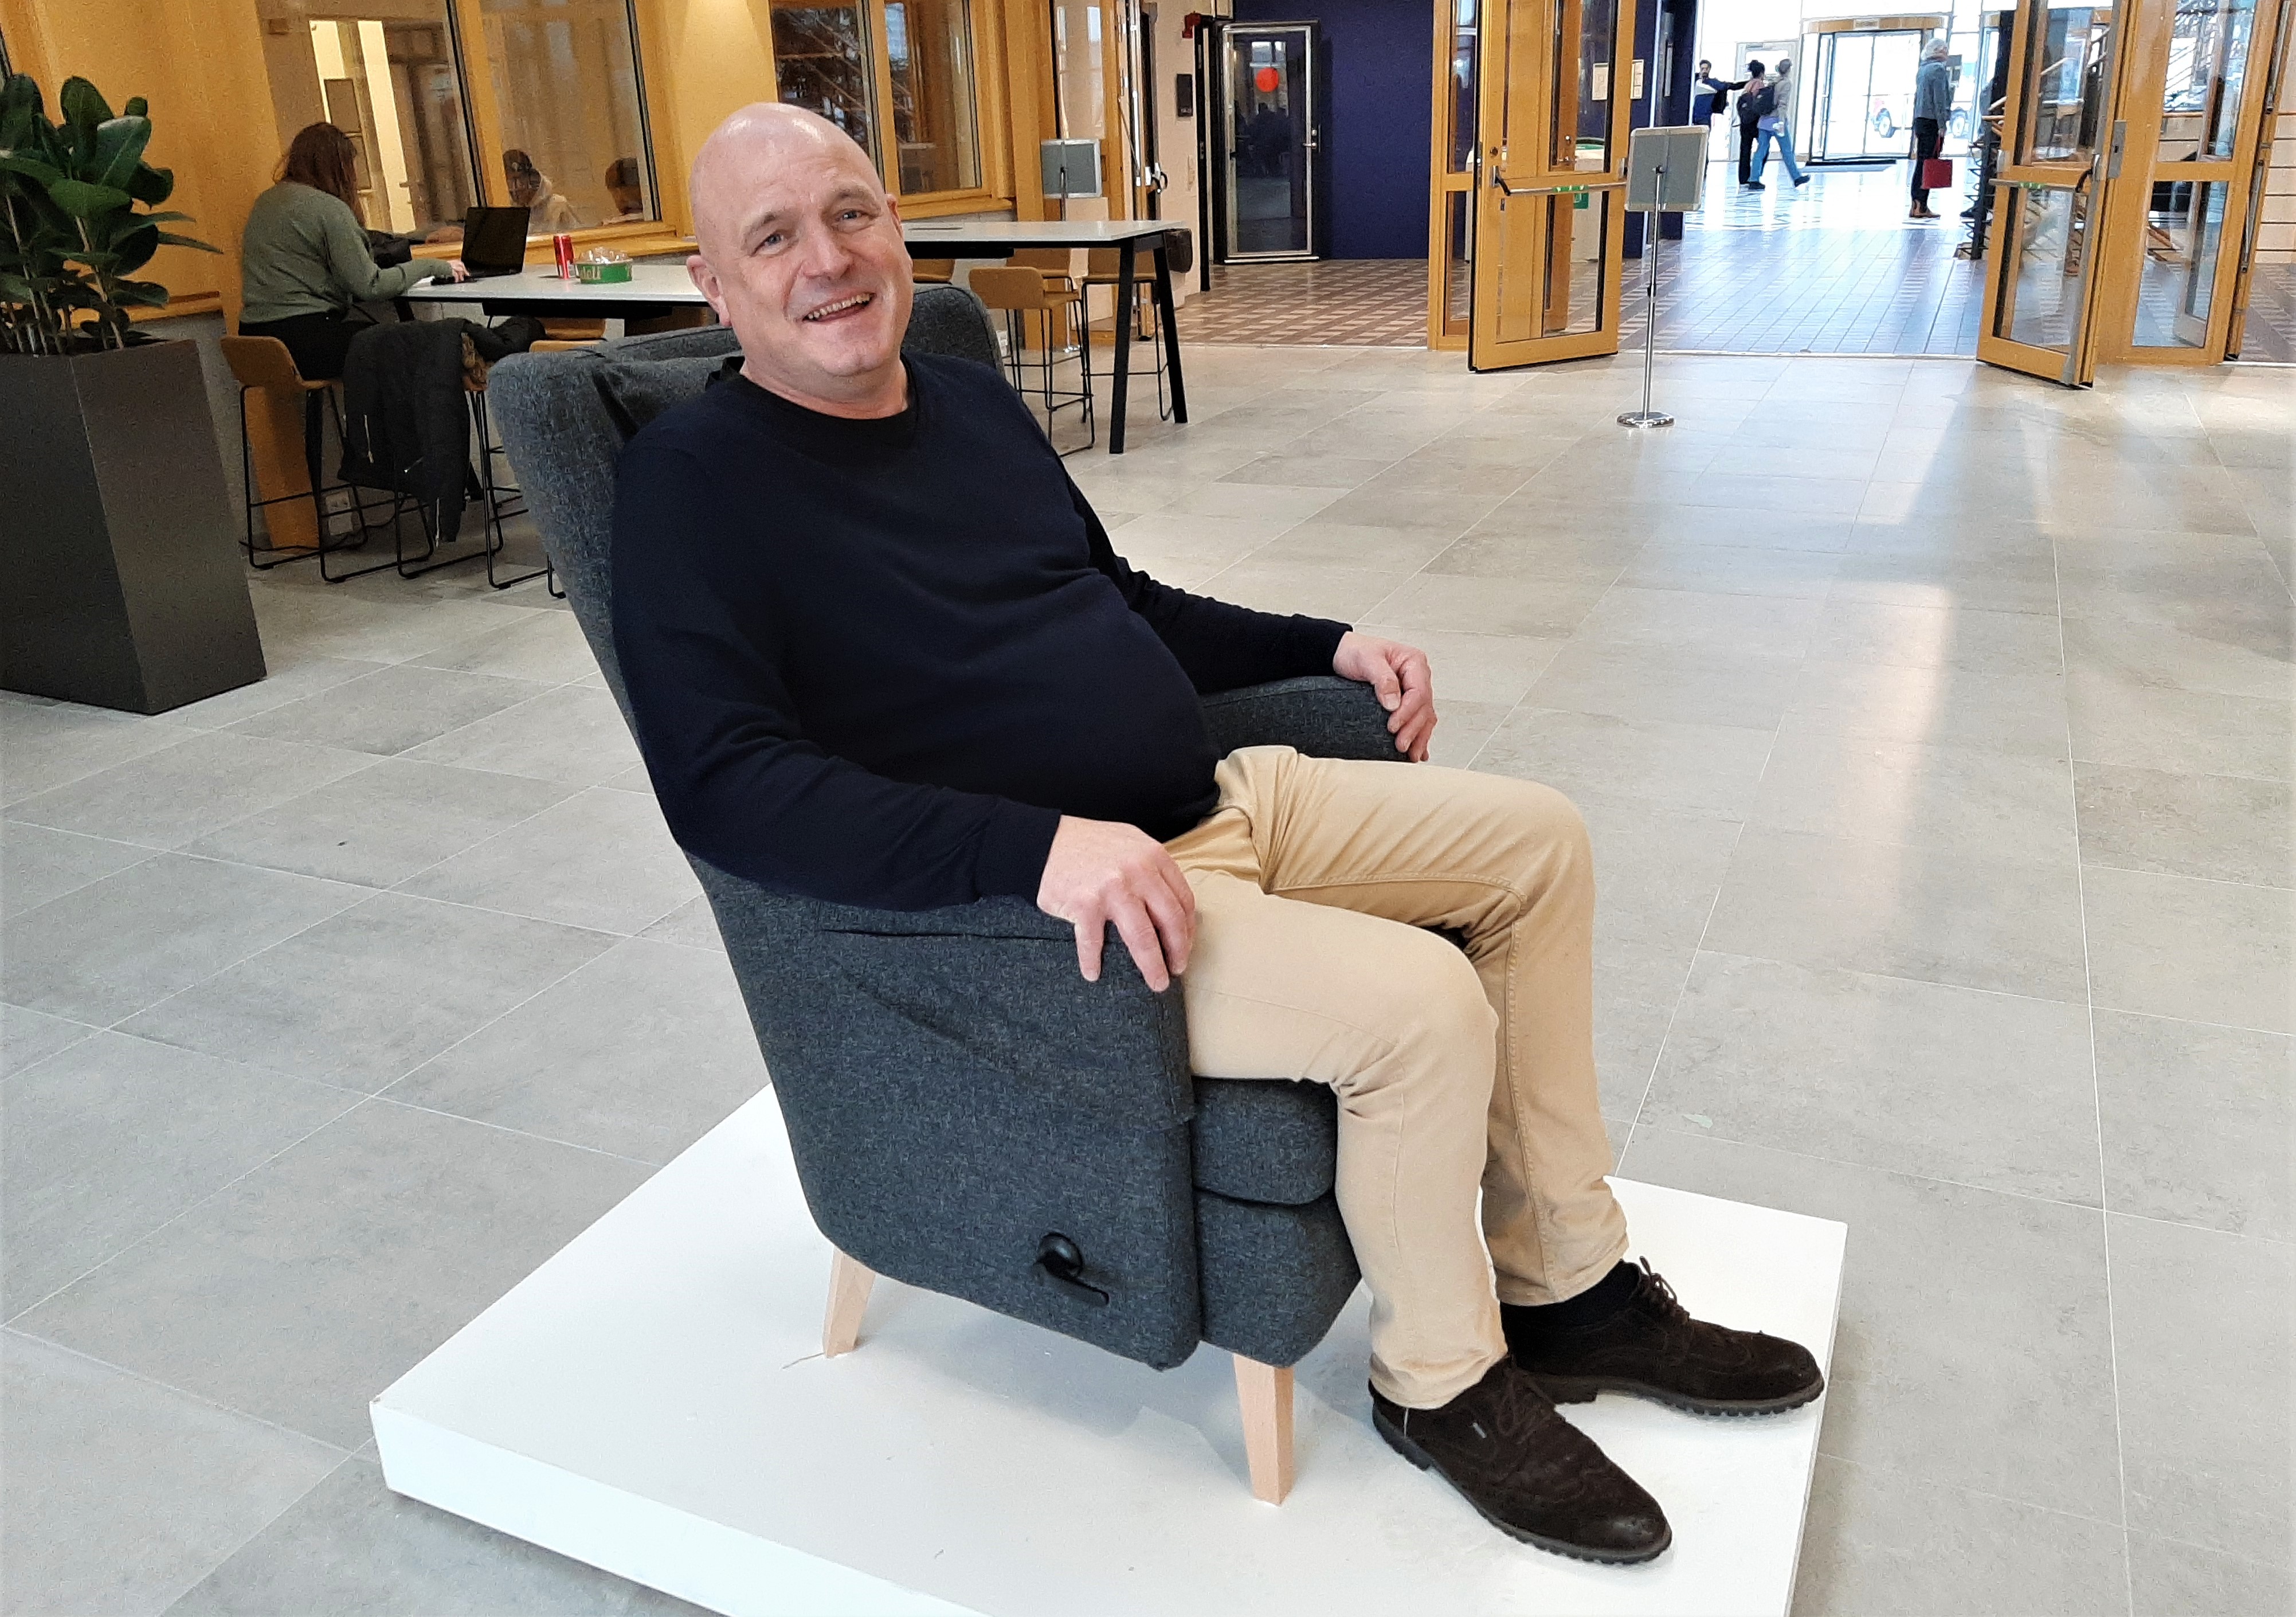 Lars Eriksson, Professor Industrial Design, in the armchair that his students have developed.